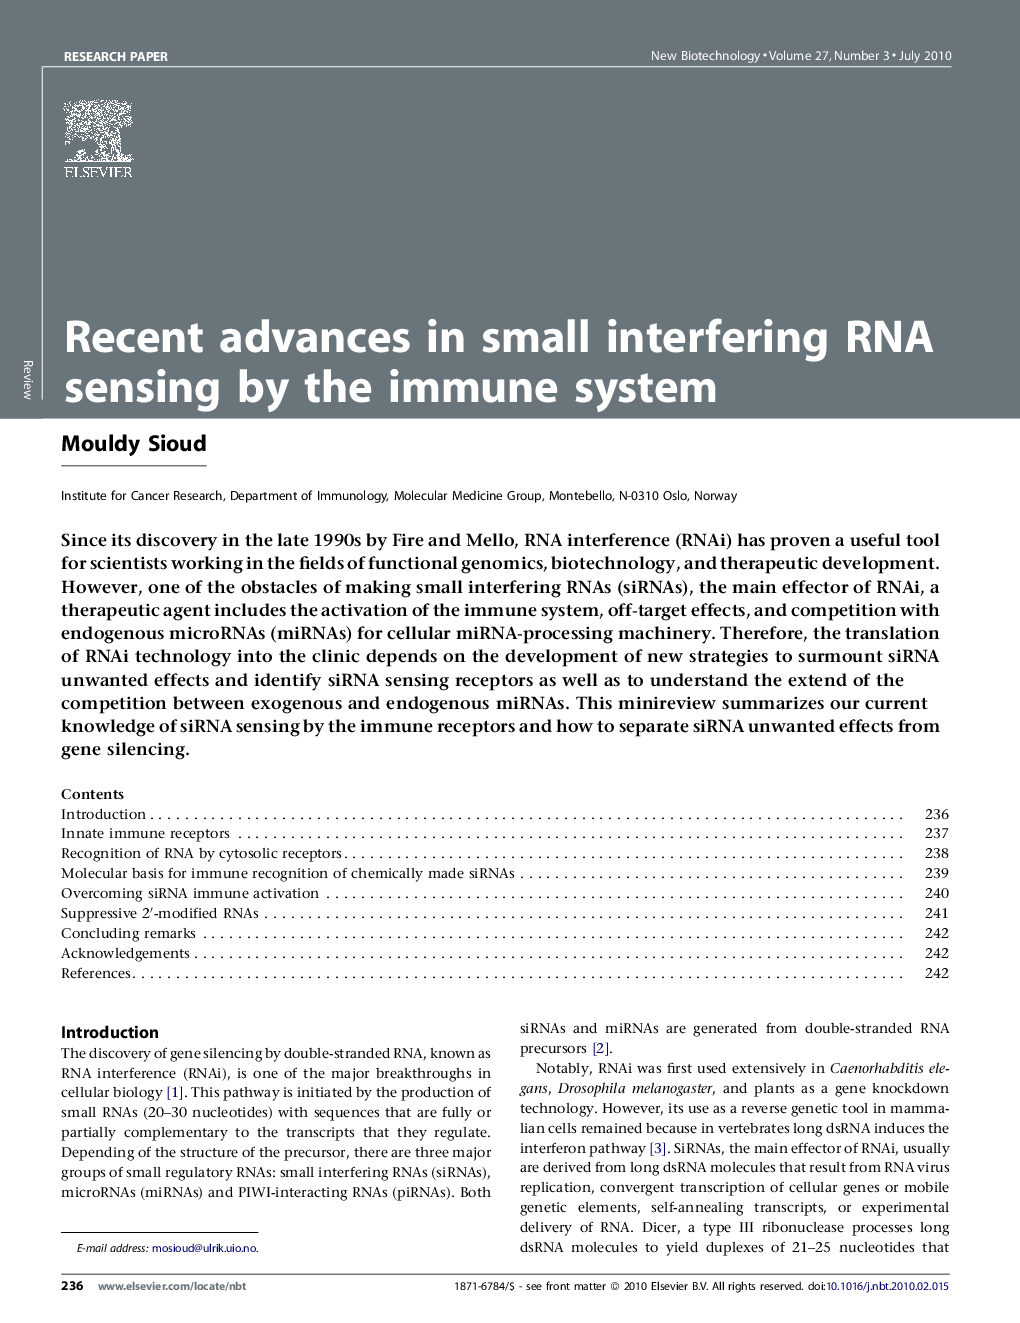 Recent advances in small interfering RNA sensing by the immune system